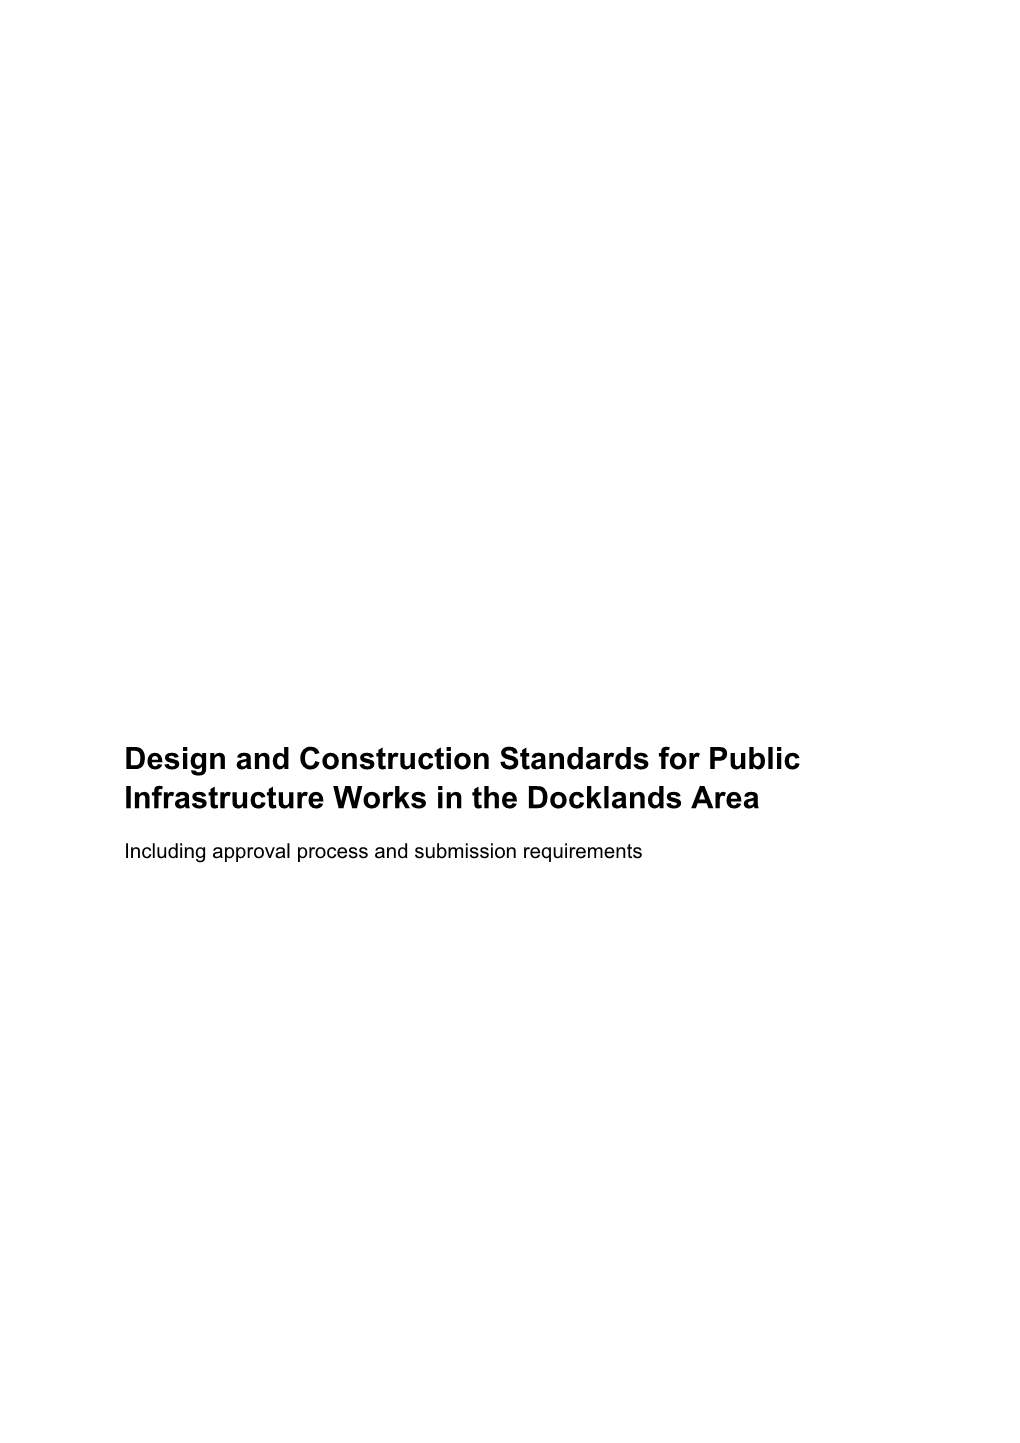 Design and Construction Standards for Public Infrastructure Works in the Docklands Area